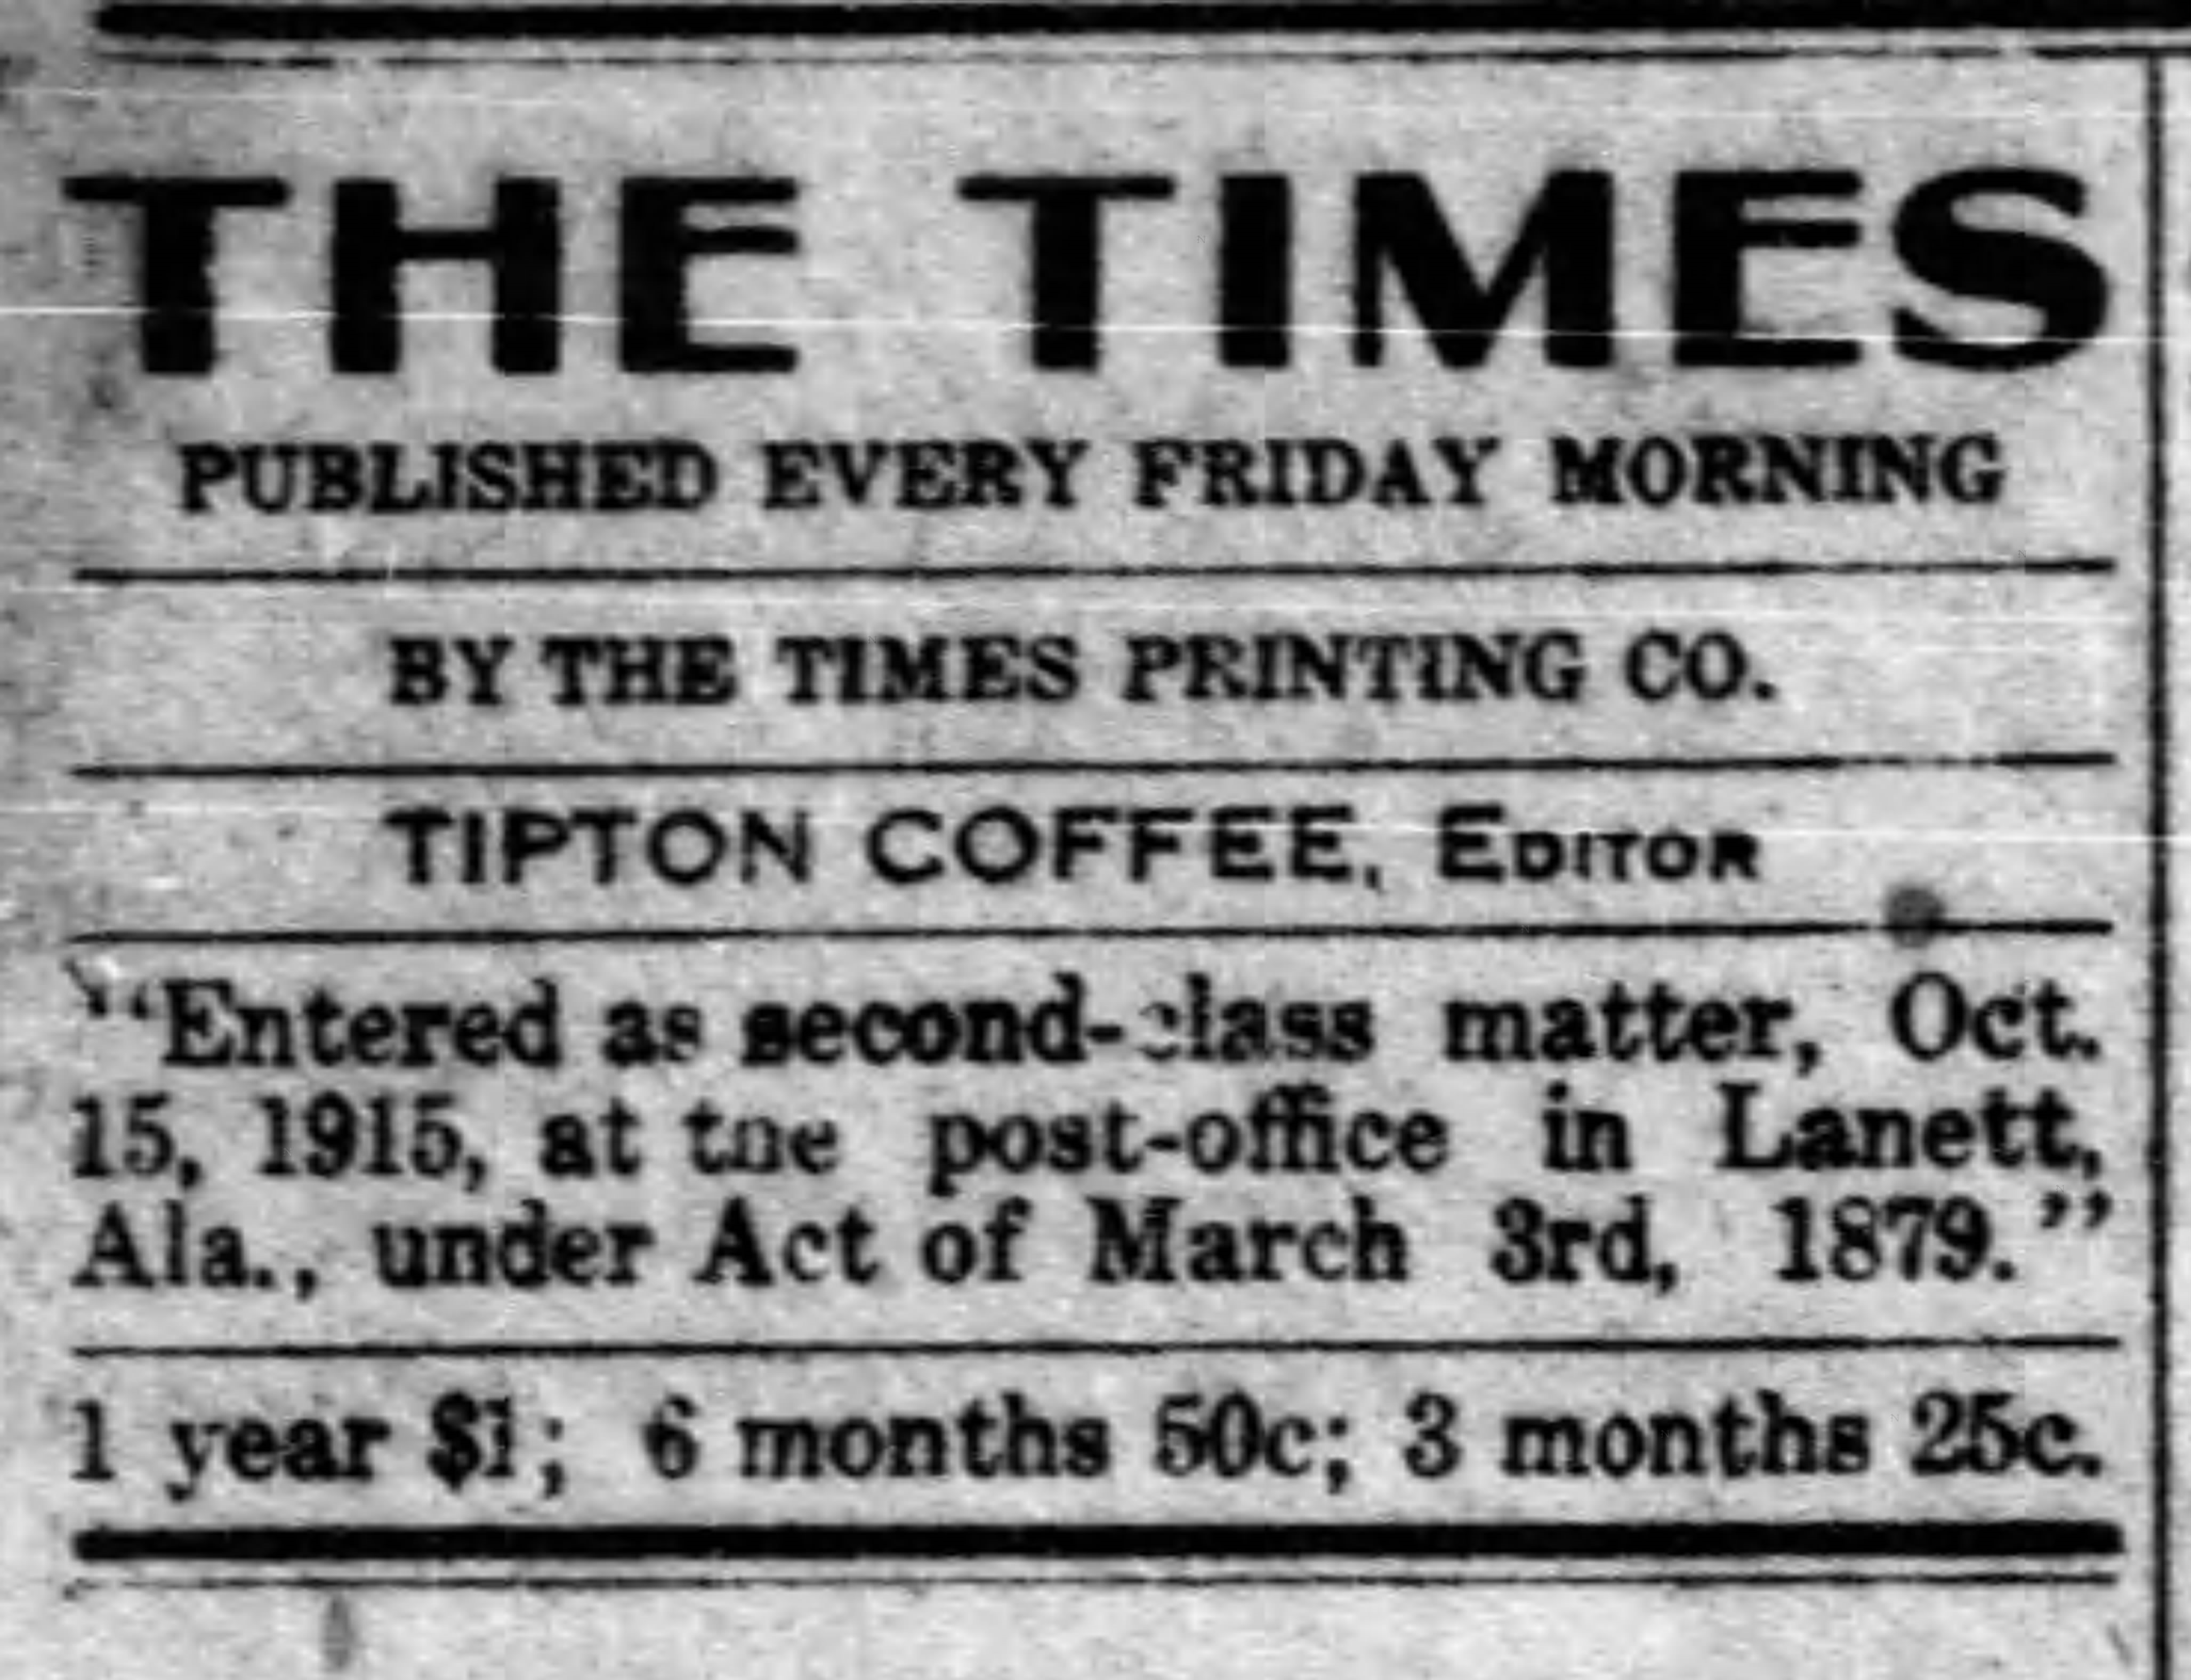 PATRON - A man from Ozark, Alabama was killed in a car accident, others motored from Stoud in 1916 Lanett newspaper